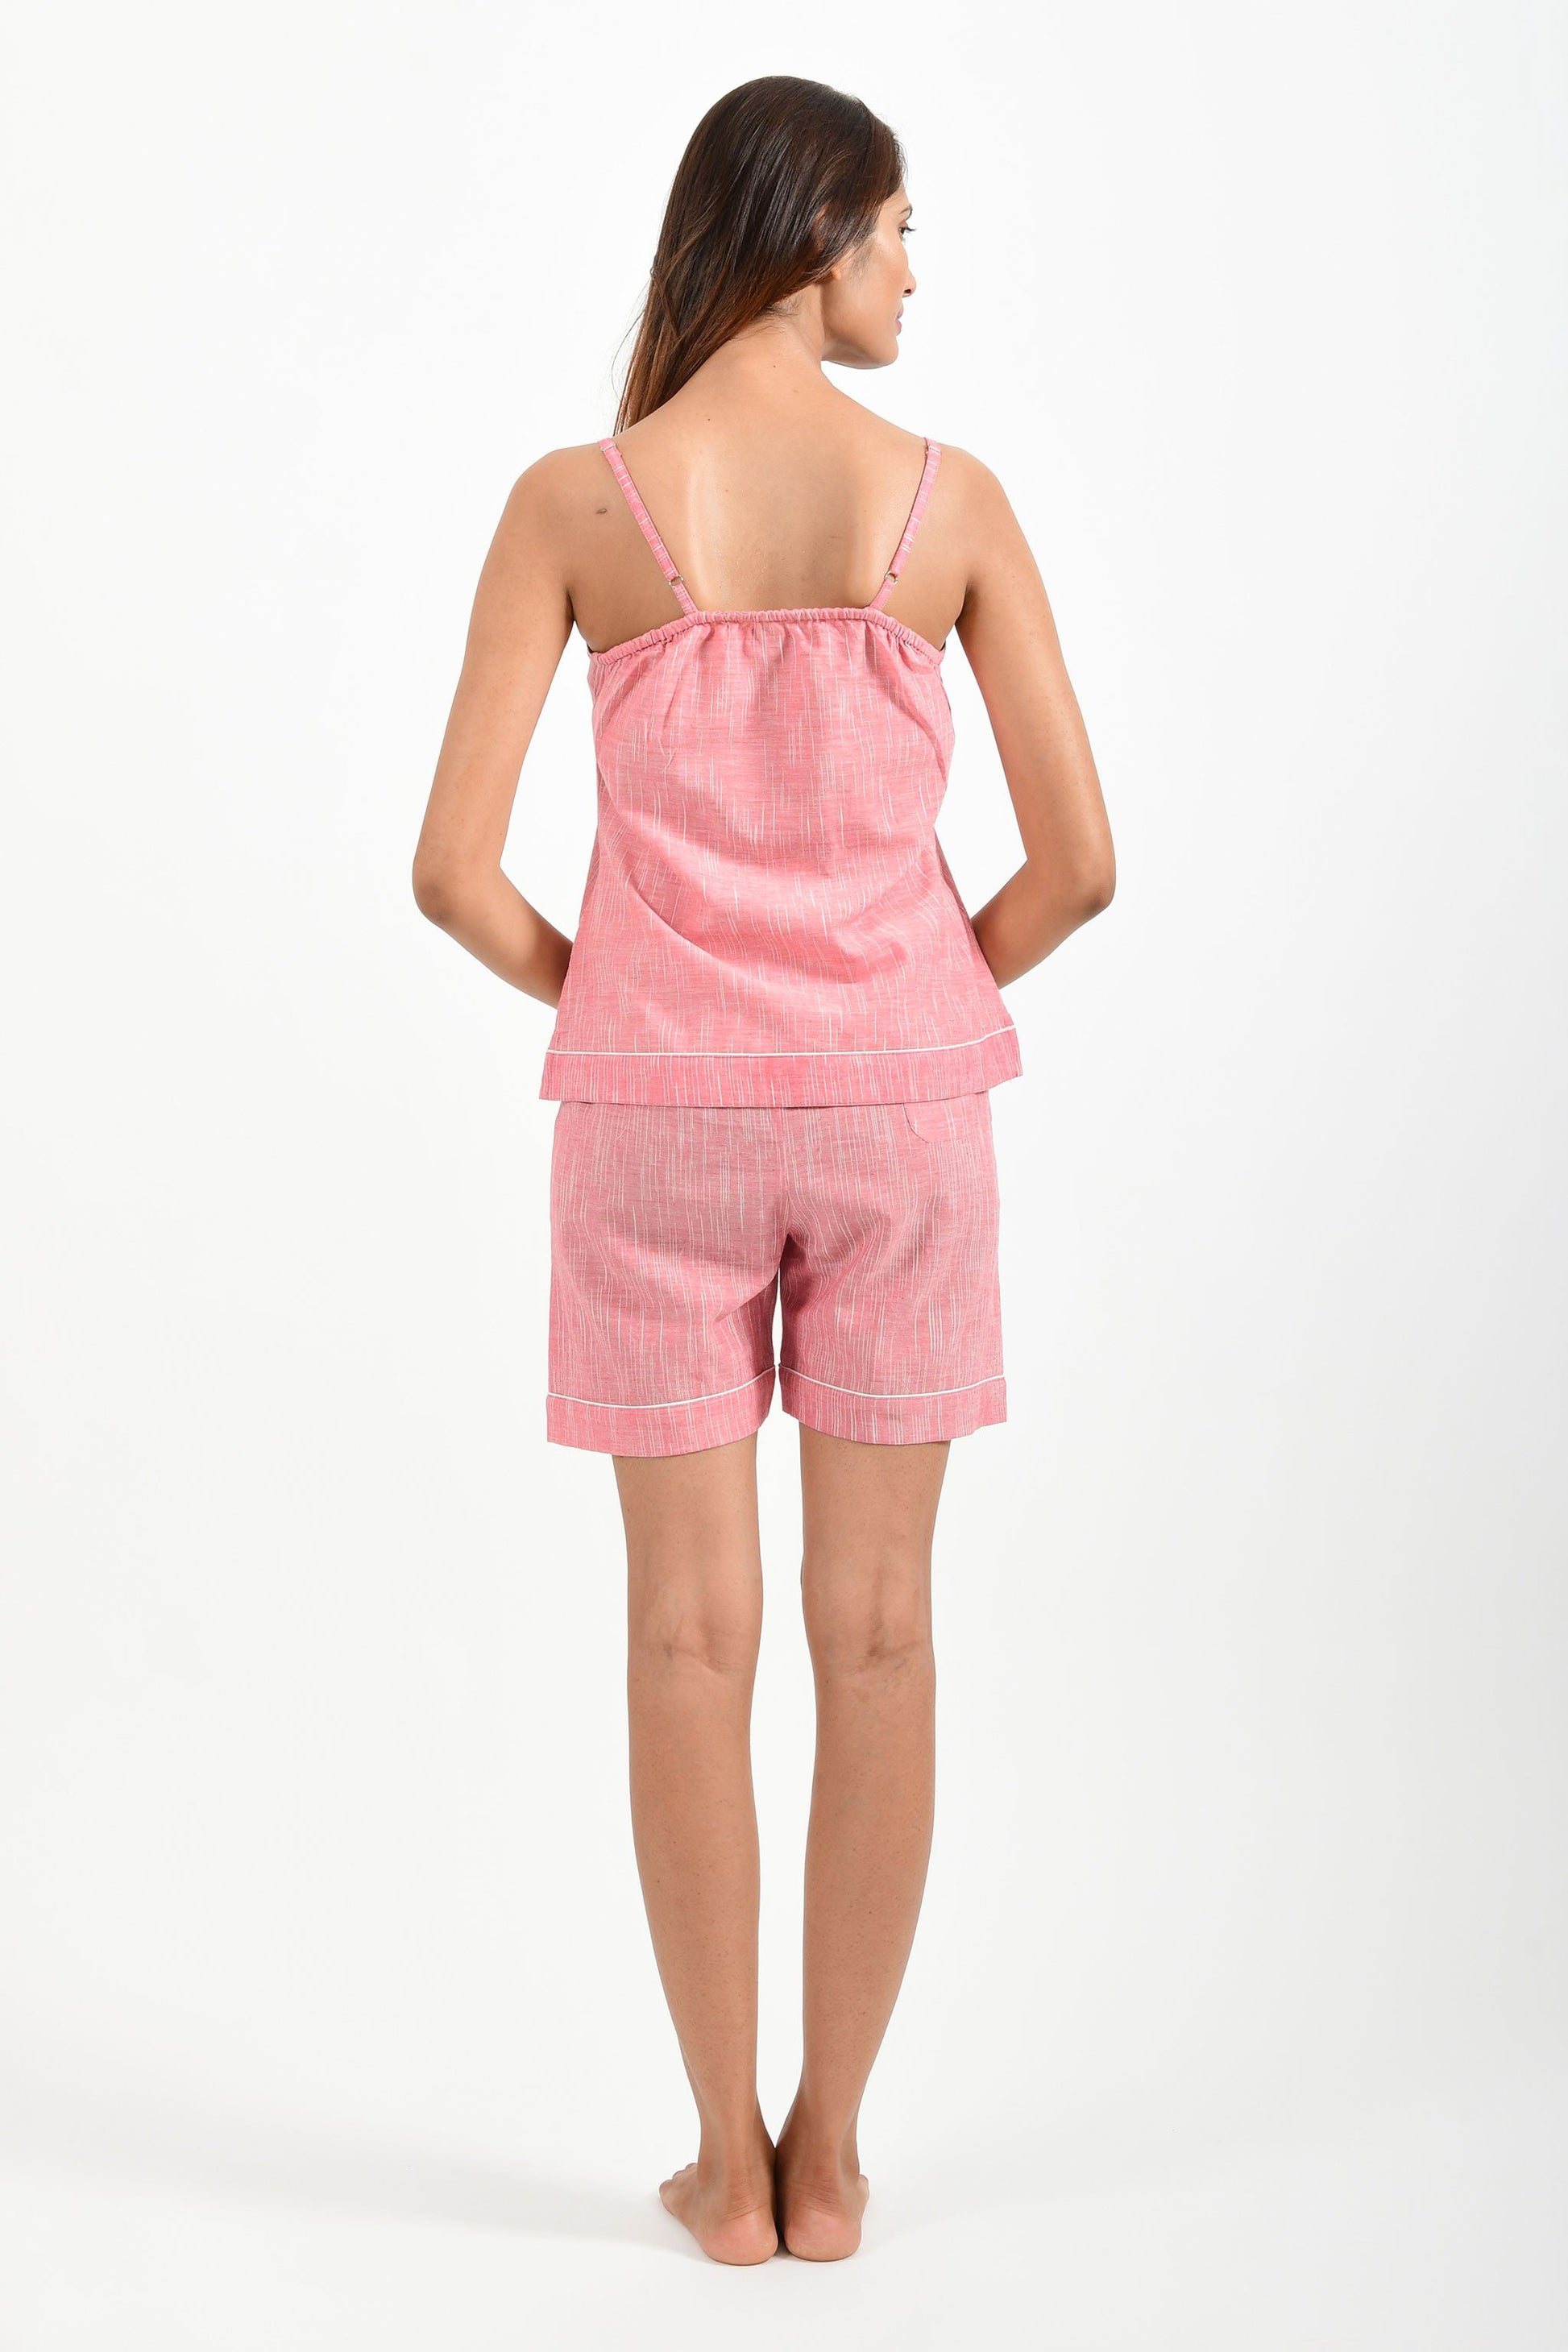 Back pose of an Indian female womenswear fashion model in azo-free space dyed pink handspun and handwoven khadi cotton spaghetti top and boxers by Cotton Rack.